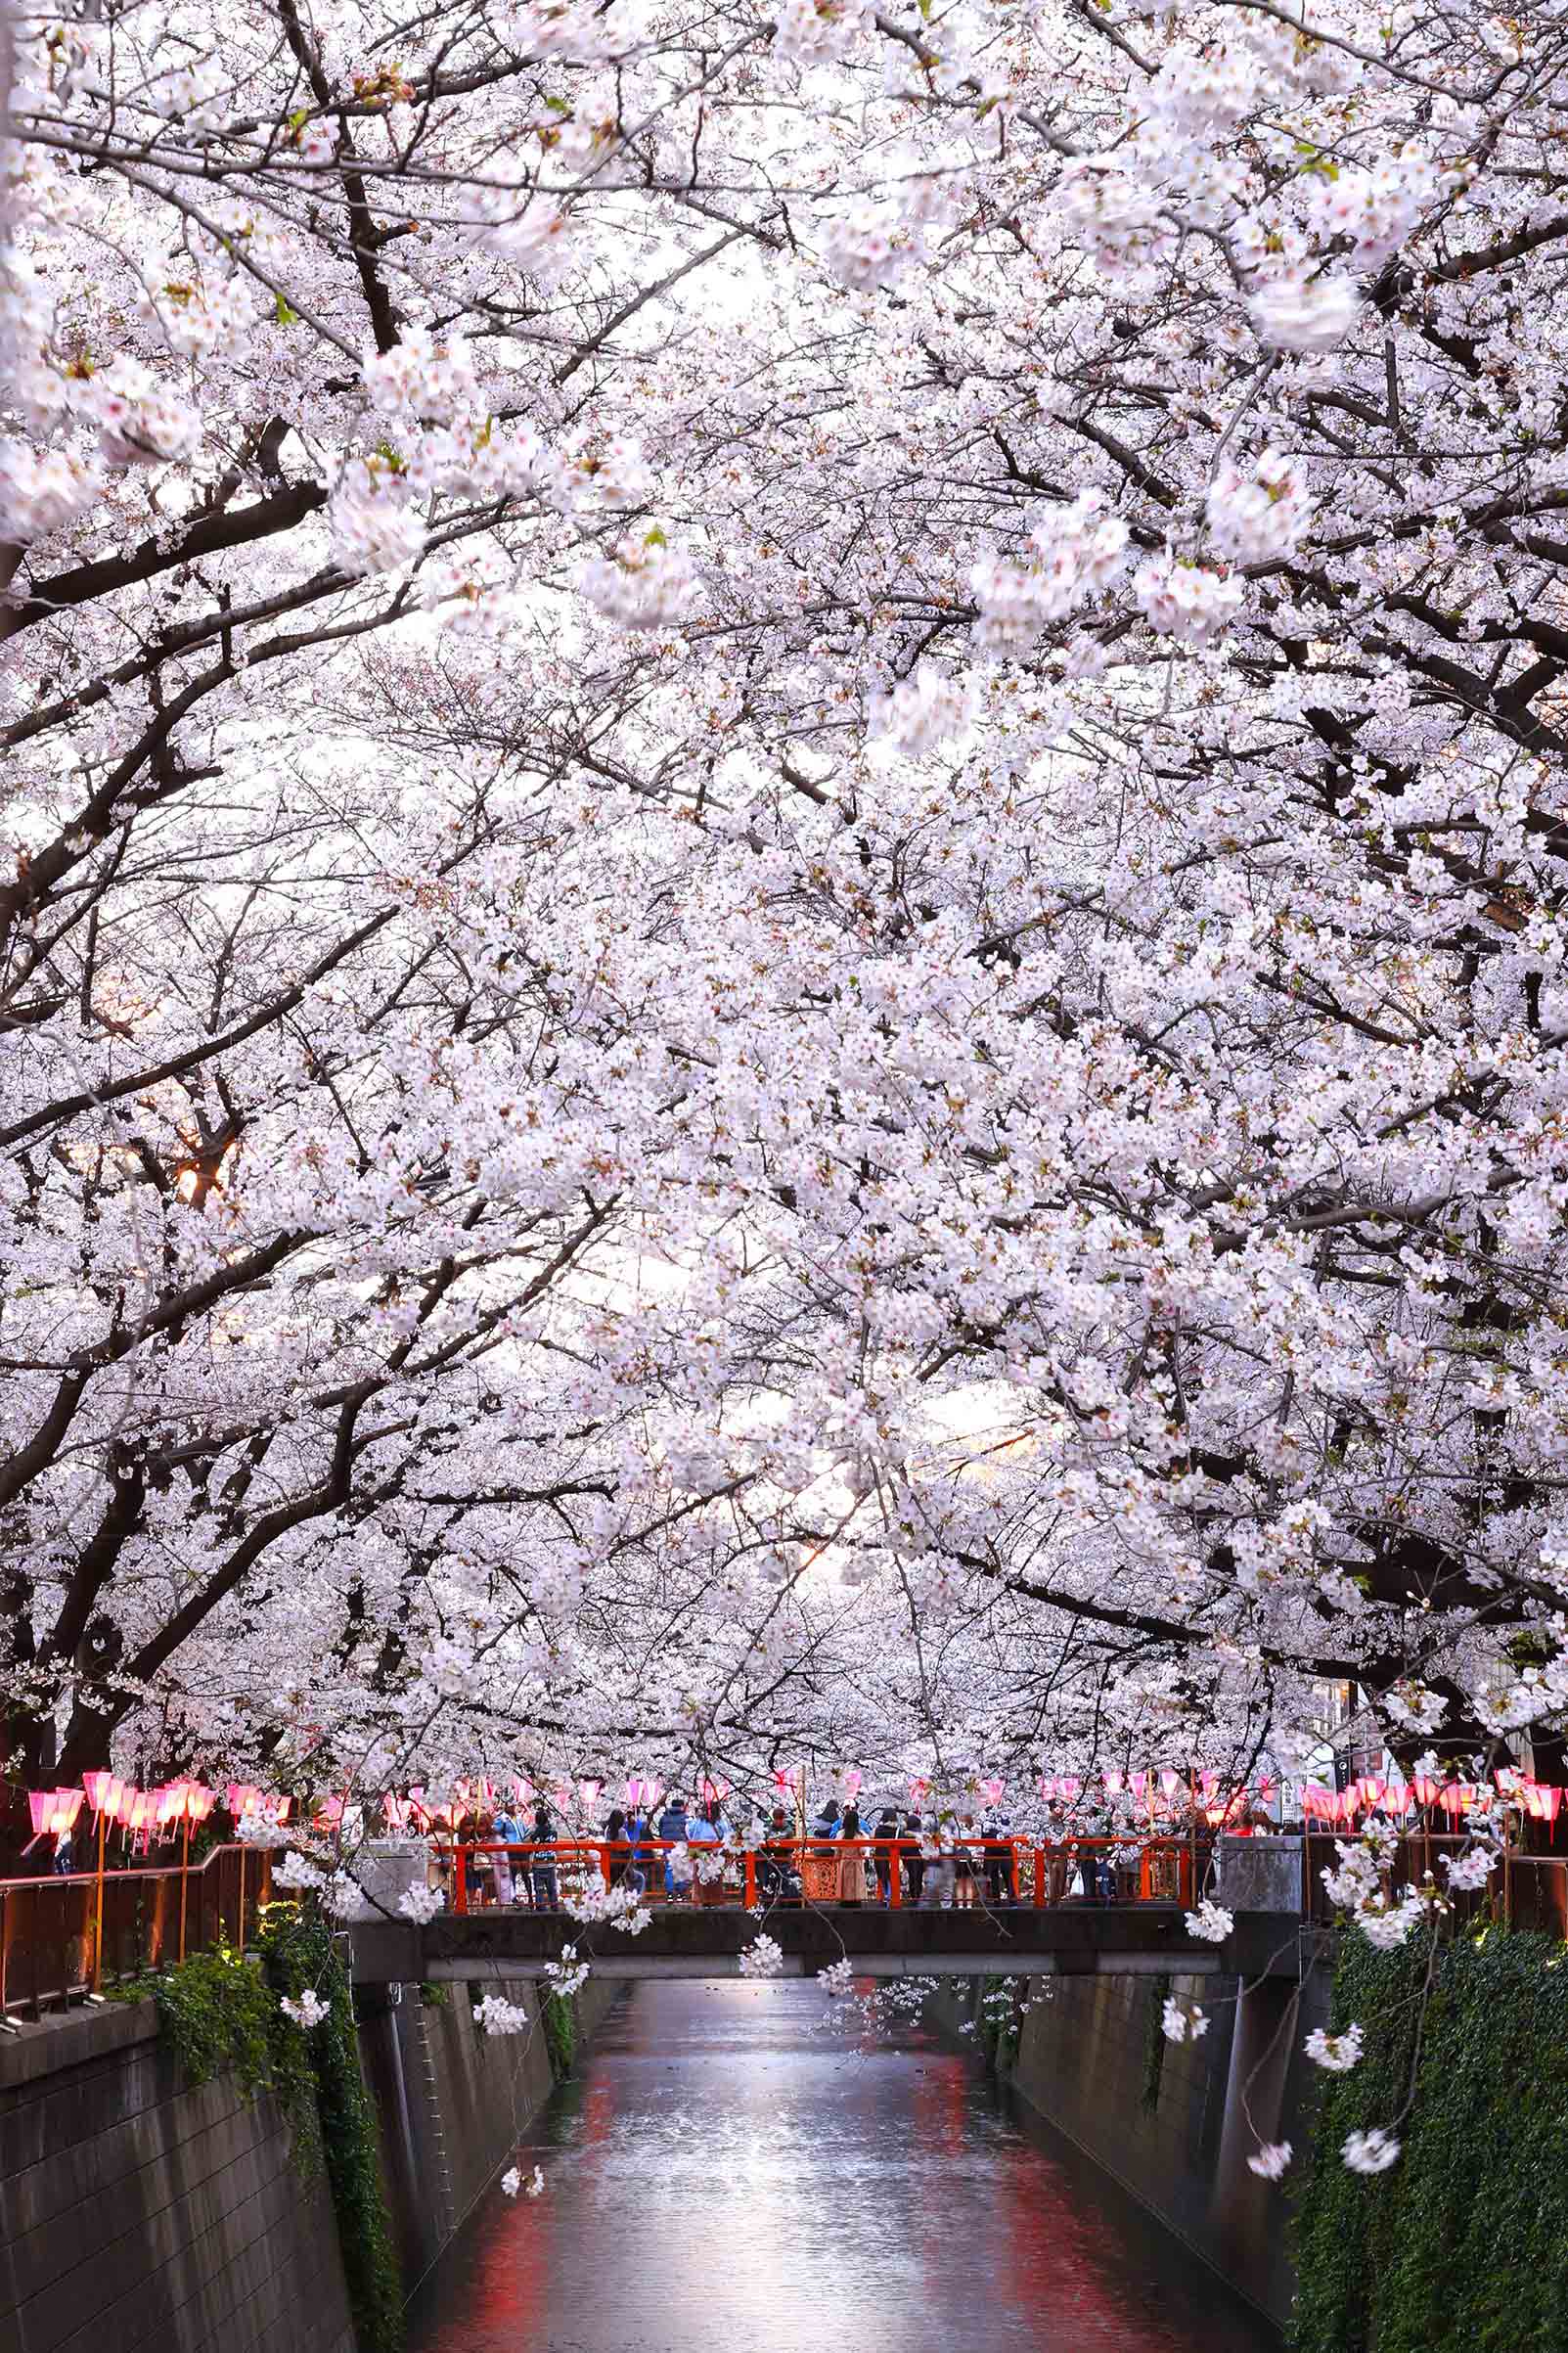 The famous cherry blossoms in bloom on the banks of the Meguro River in Tokyo